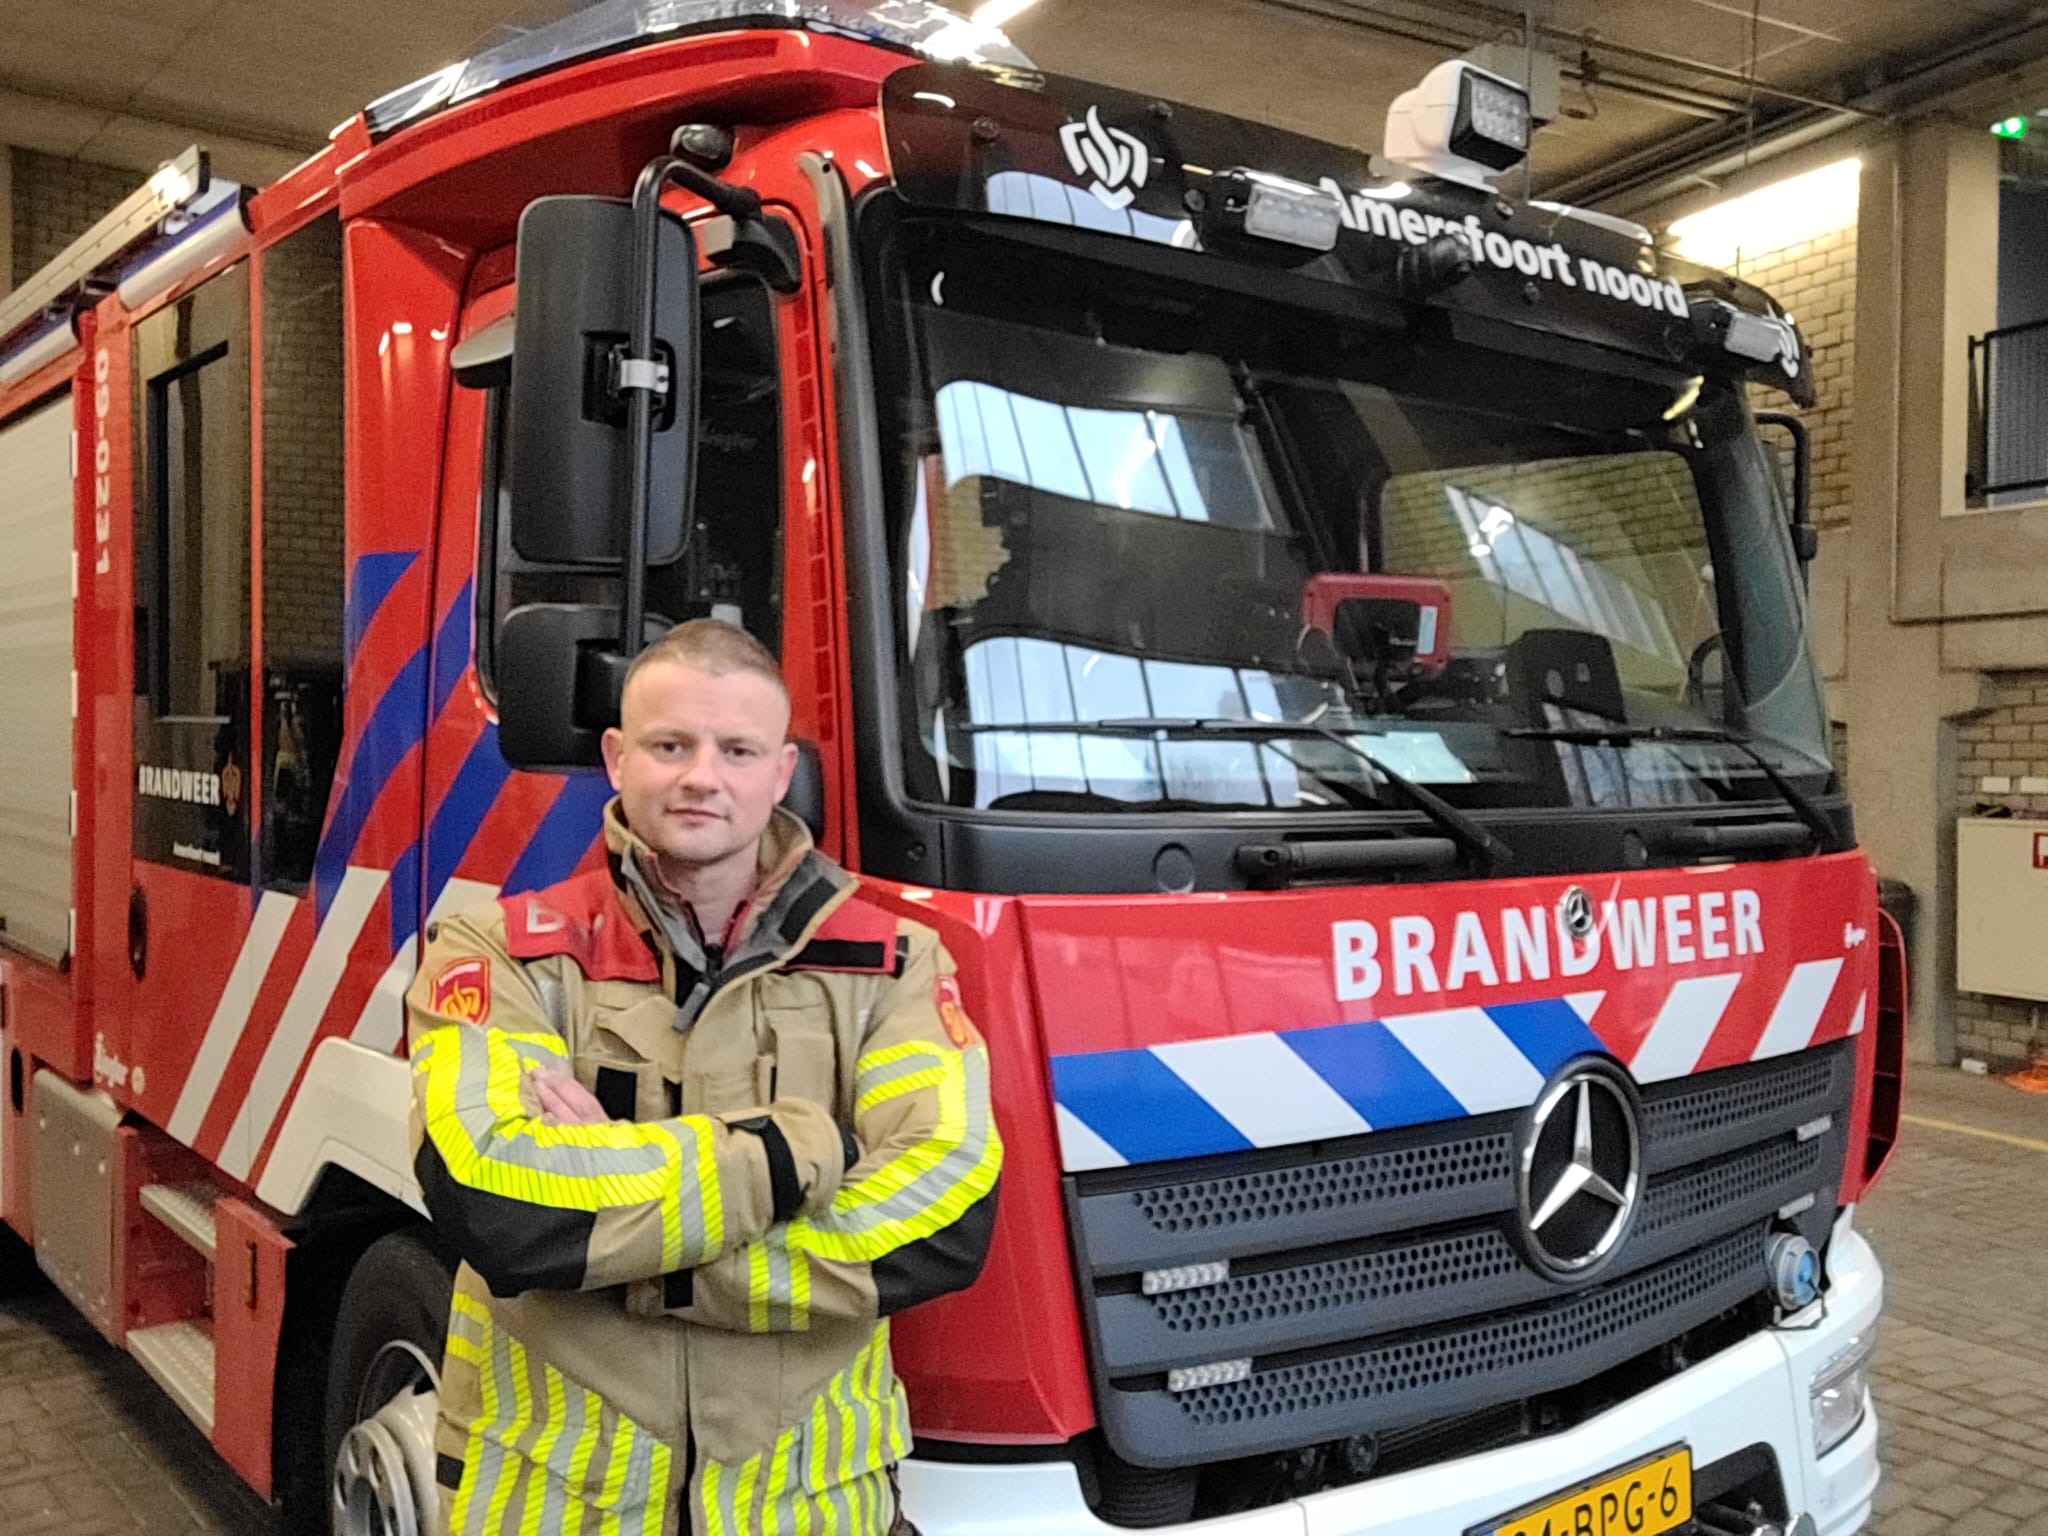 Sander Houtveen in front of a fire truck in his fire fighter uniform